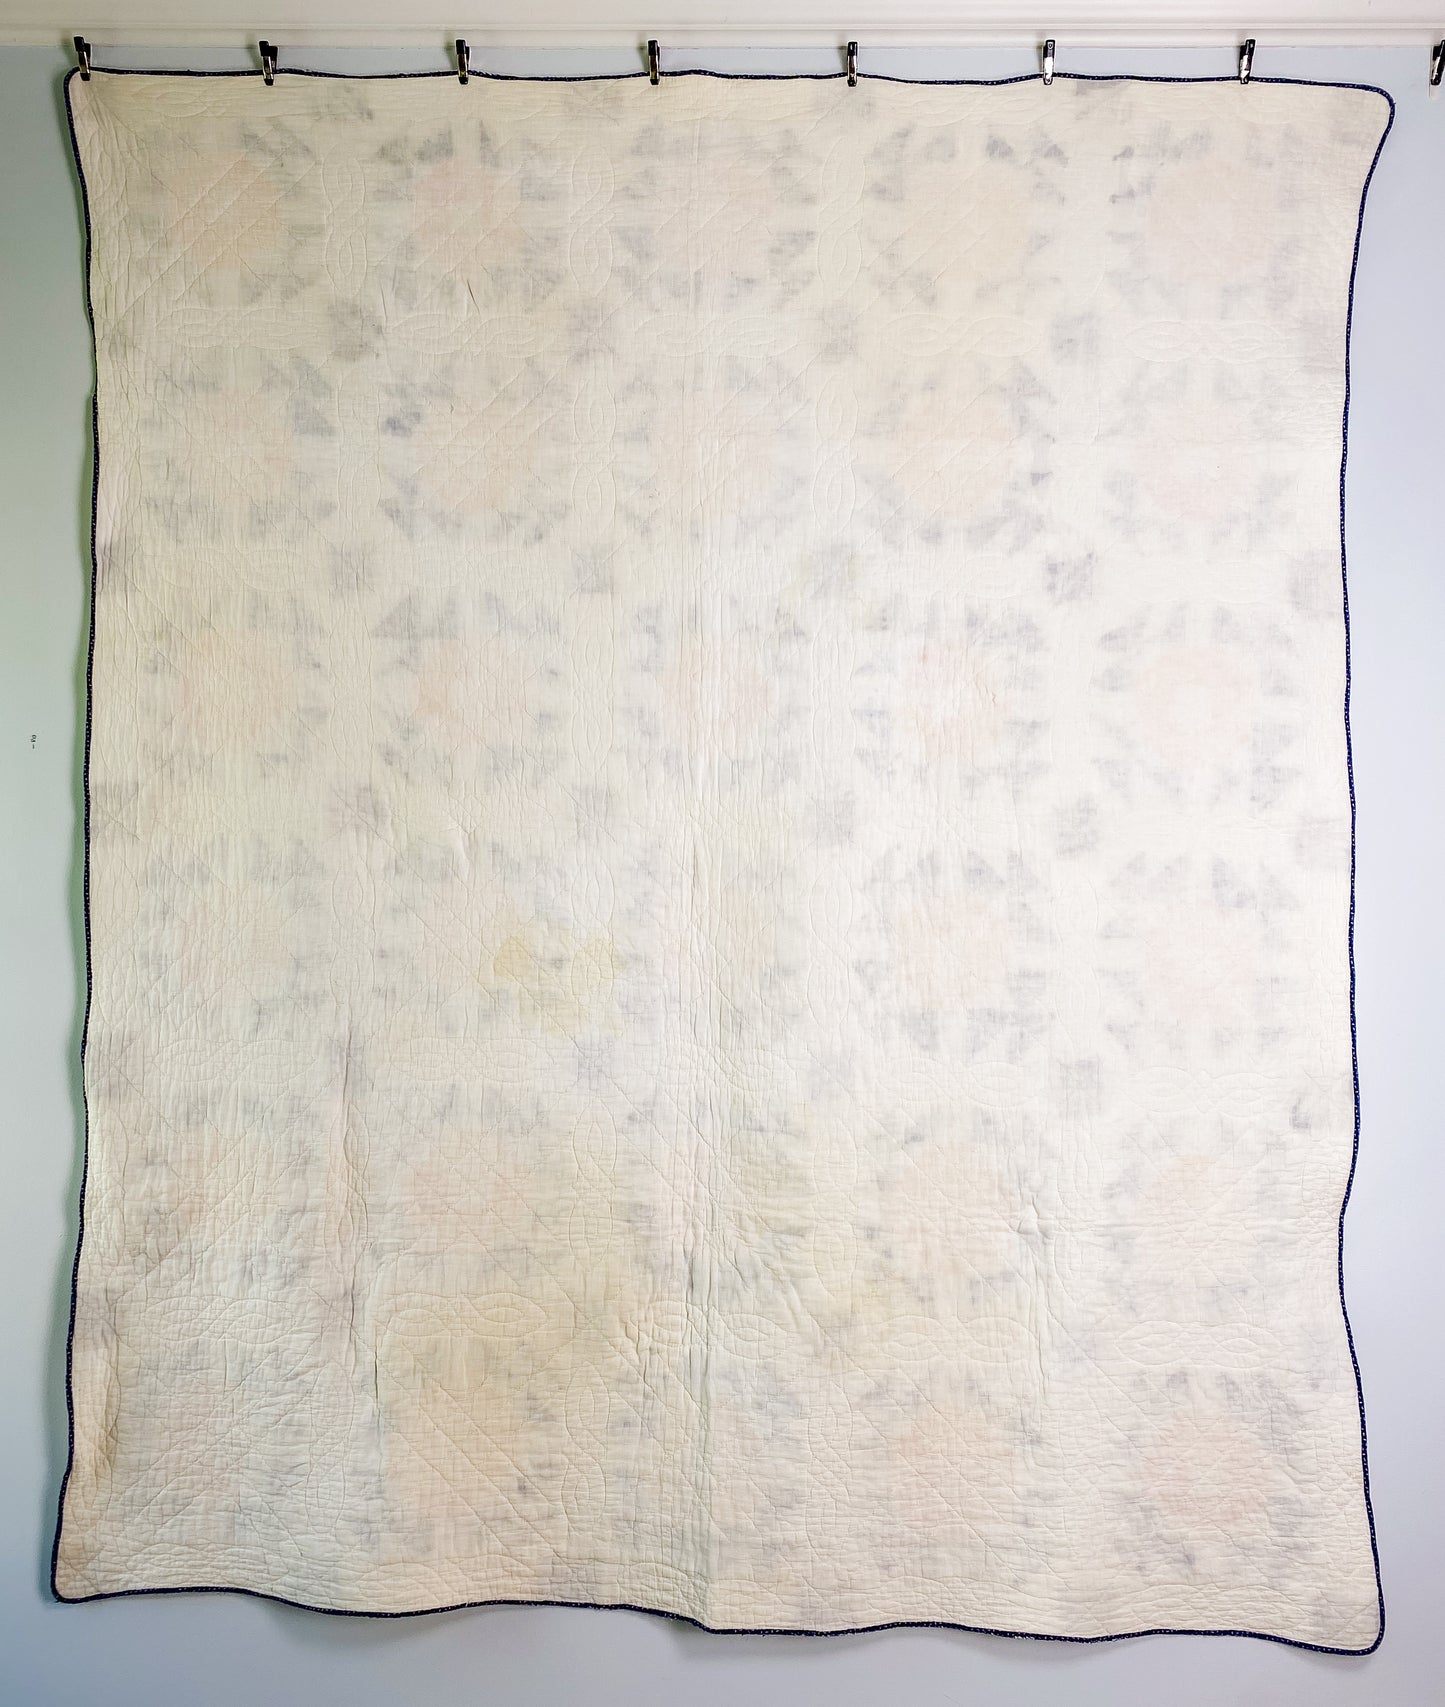 Vintage Blue and Peach Crown of Thorns Quilt, c1930s